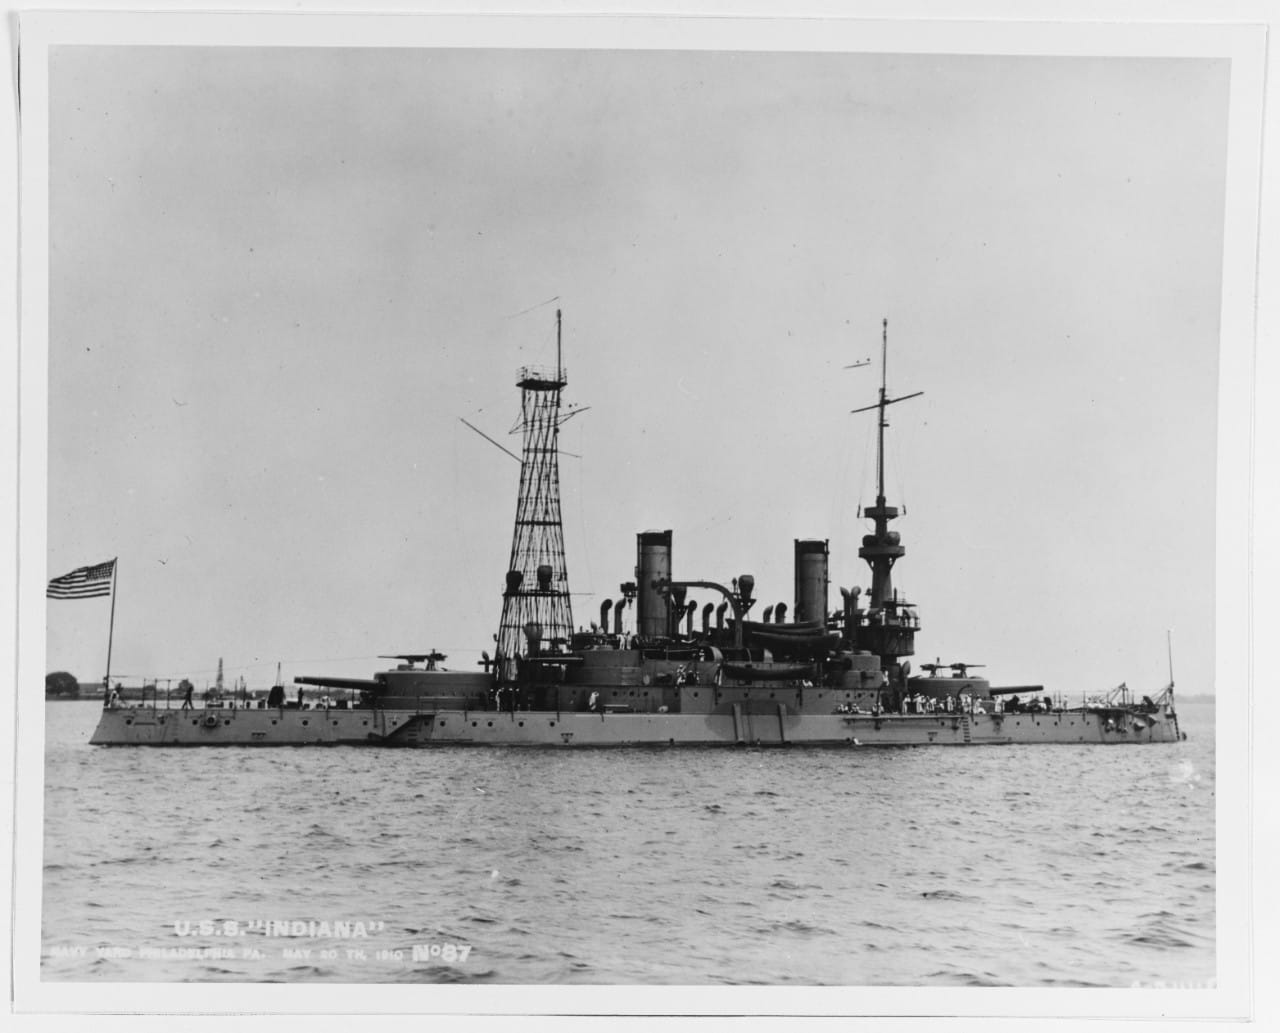 The Fall (and Rise) of the New Navy & The Spanish American War